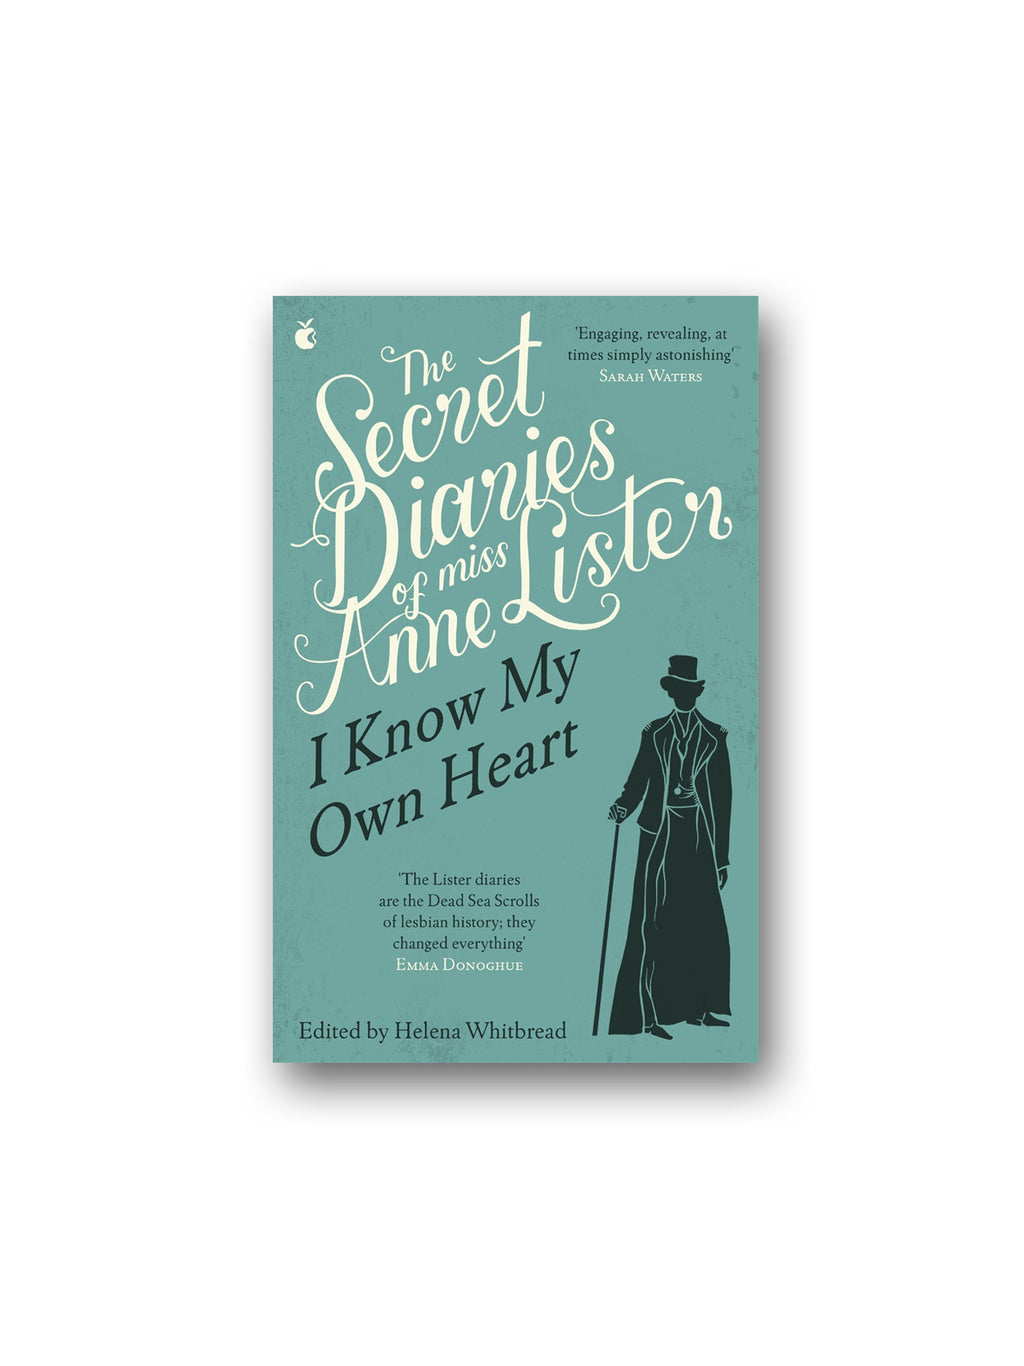 The Secret Diaries Of Miss Anne Lister – Vol.1: I Know My Own Heart